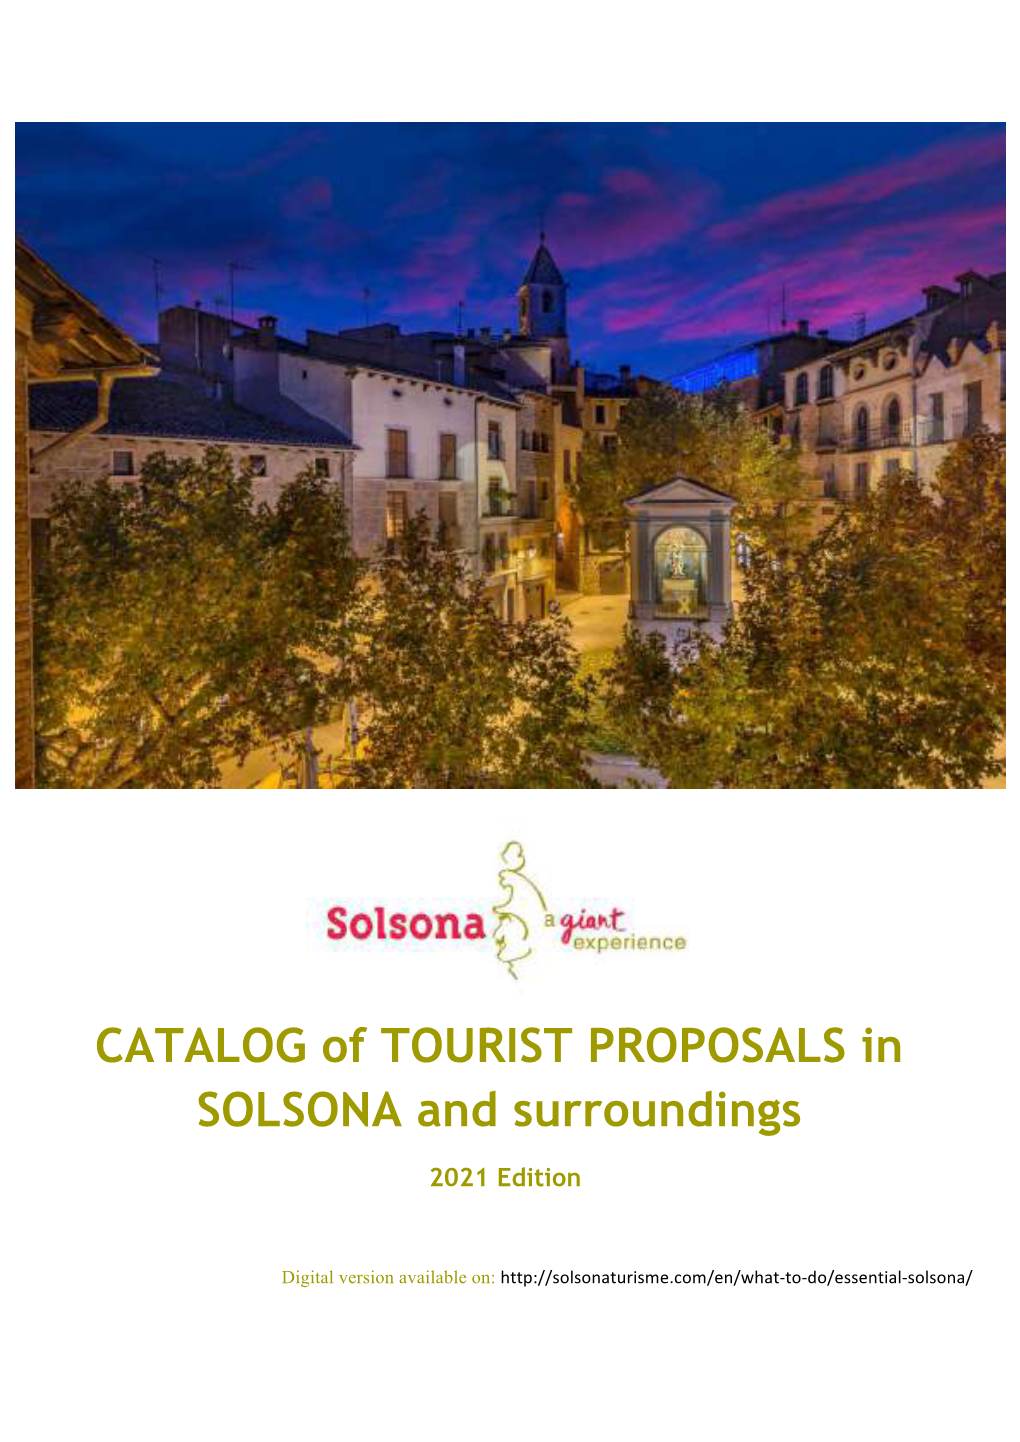 CATALOG of TOURIST PROPOSALS in SOLSONA and Surroundings